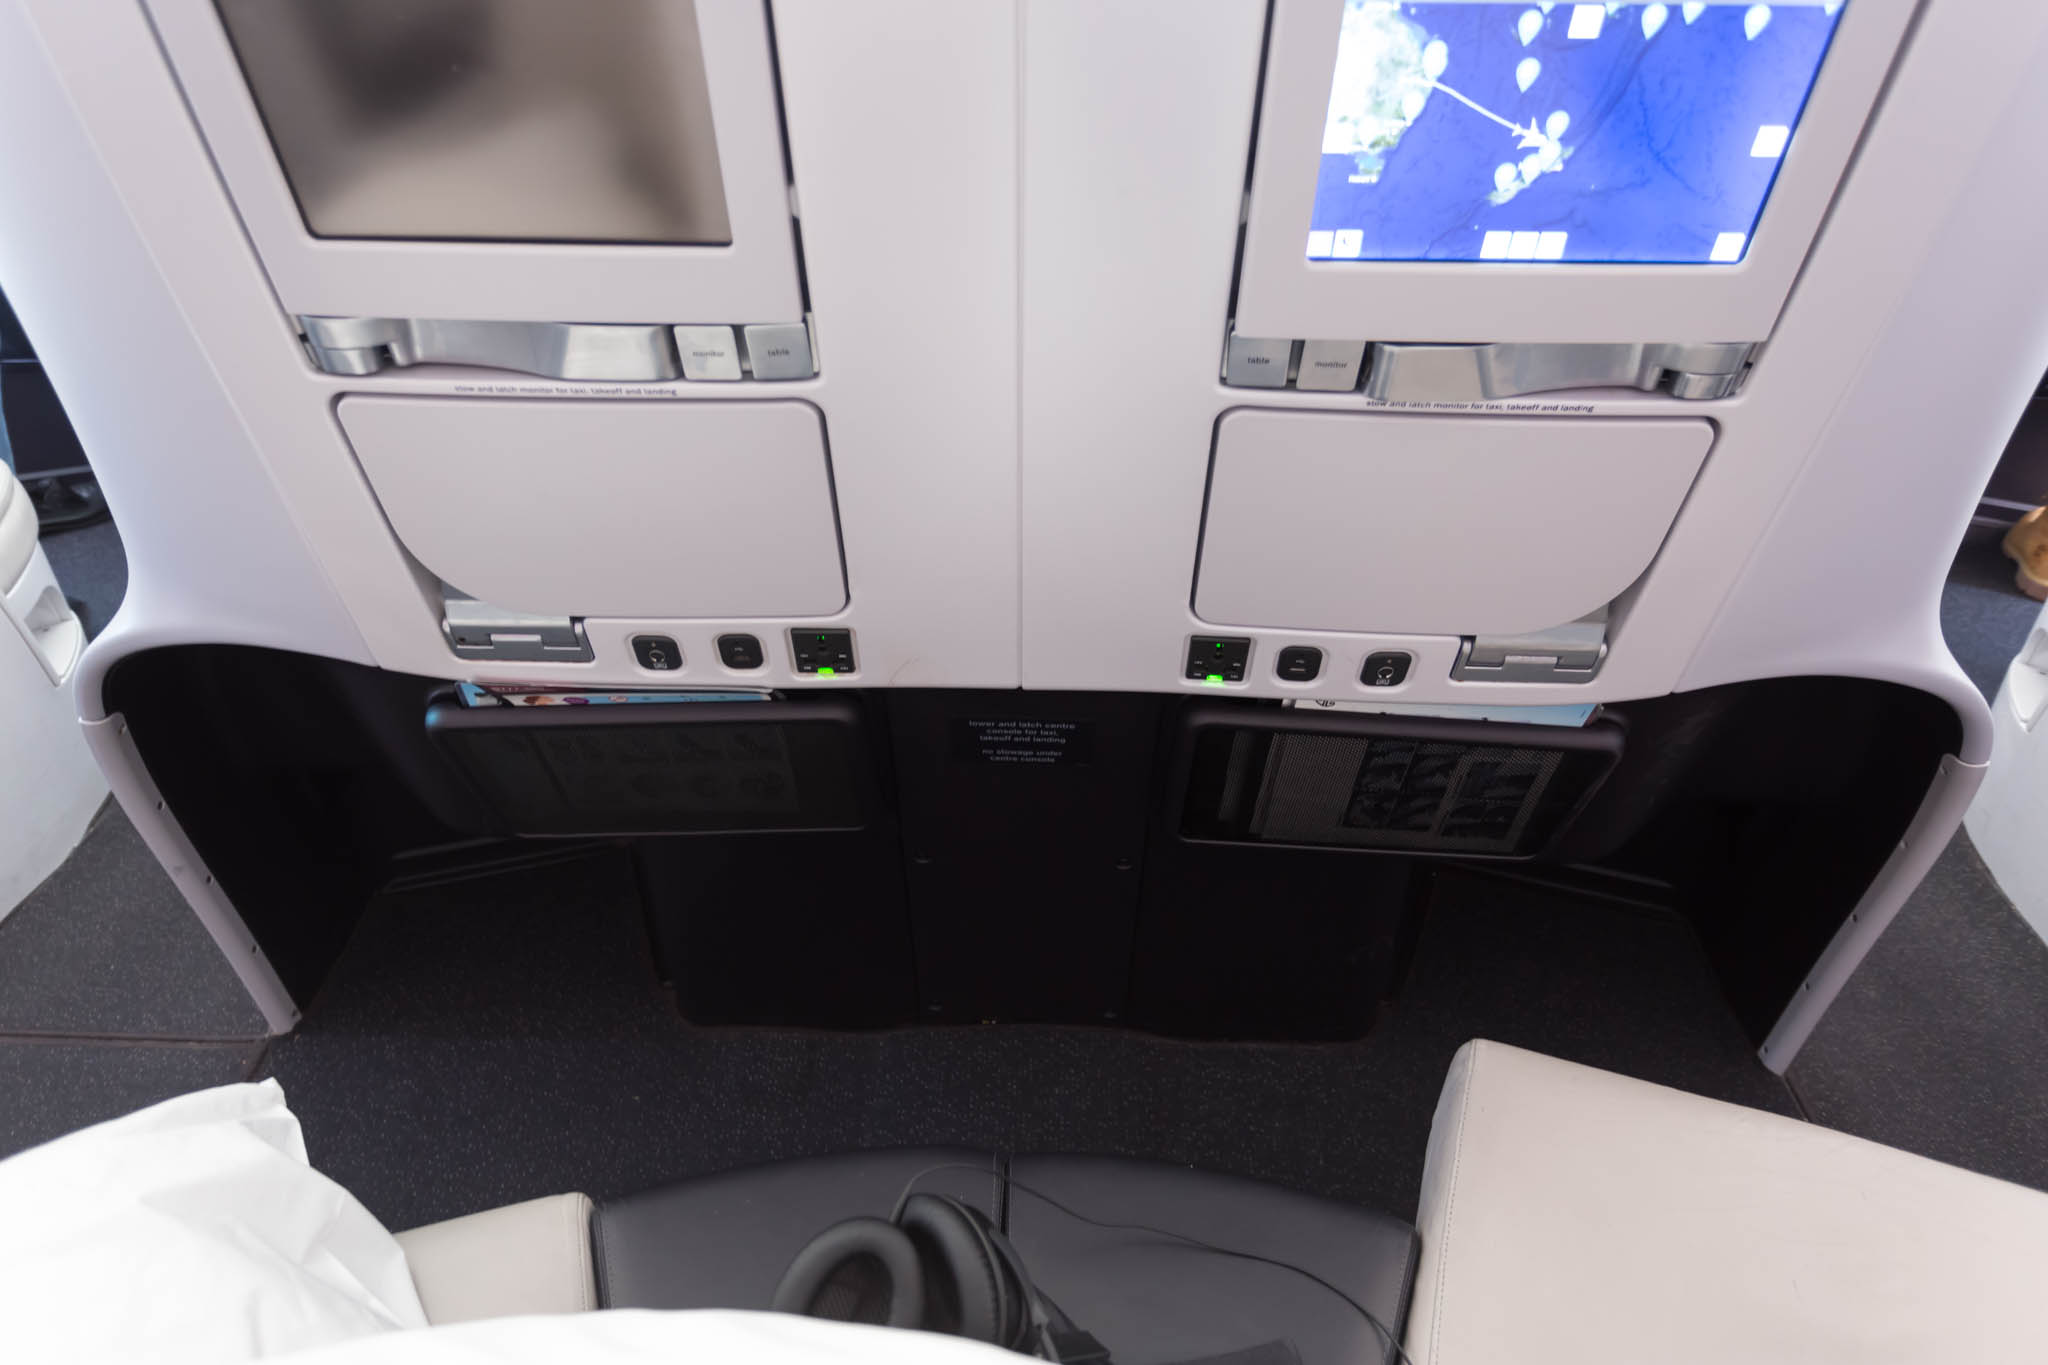 the seats and monitors in an airplane